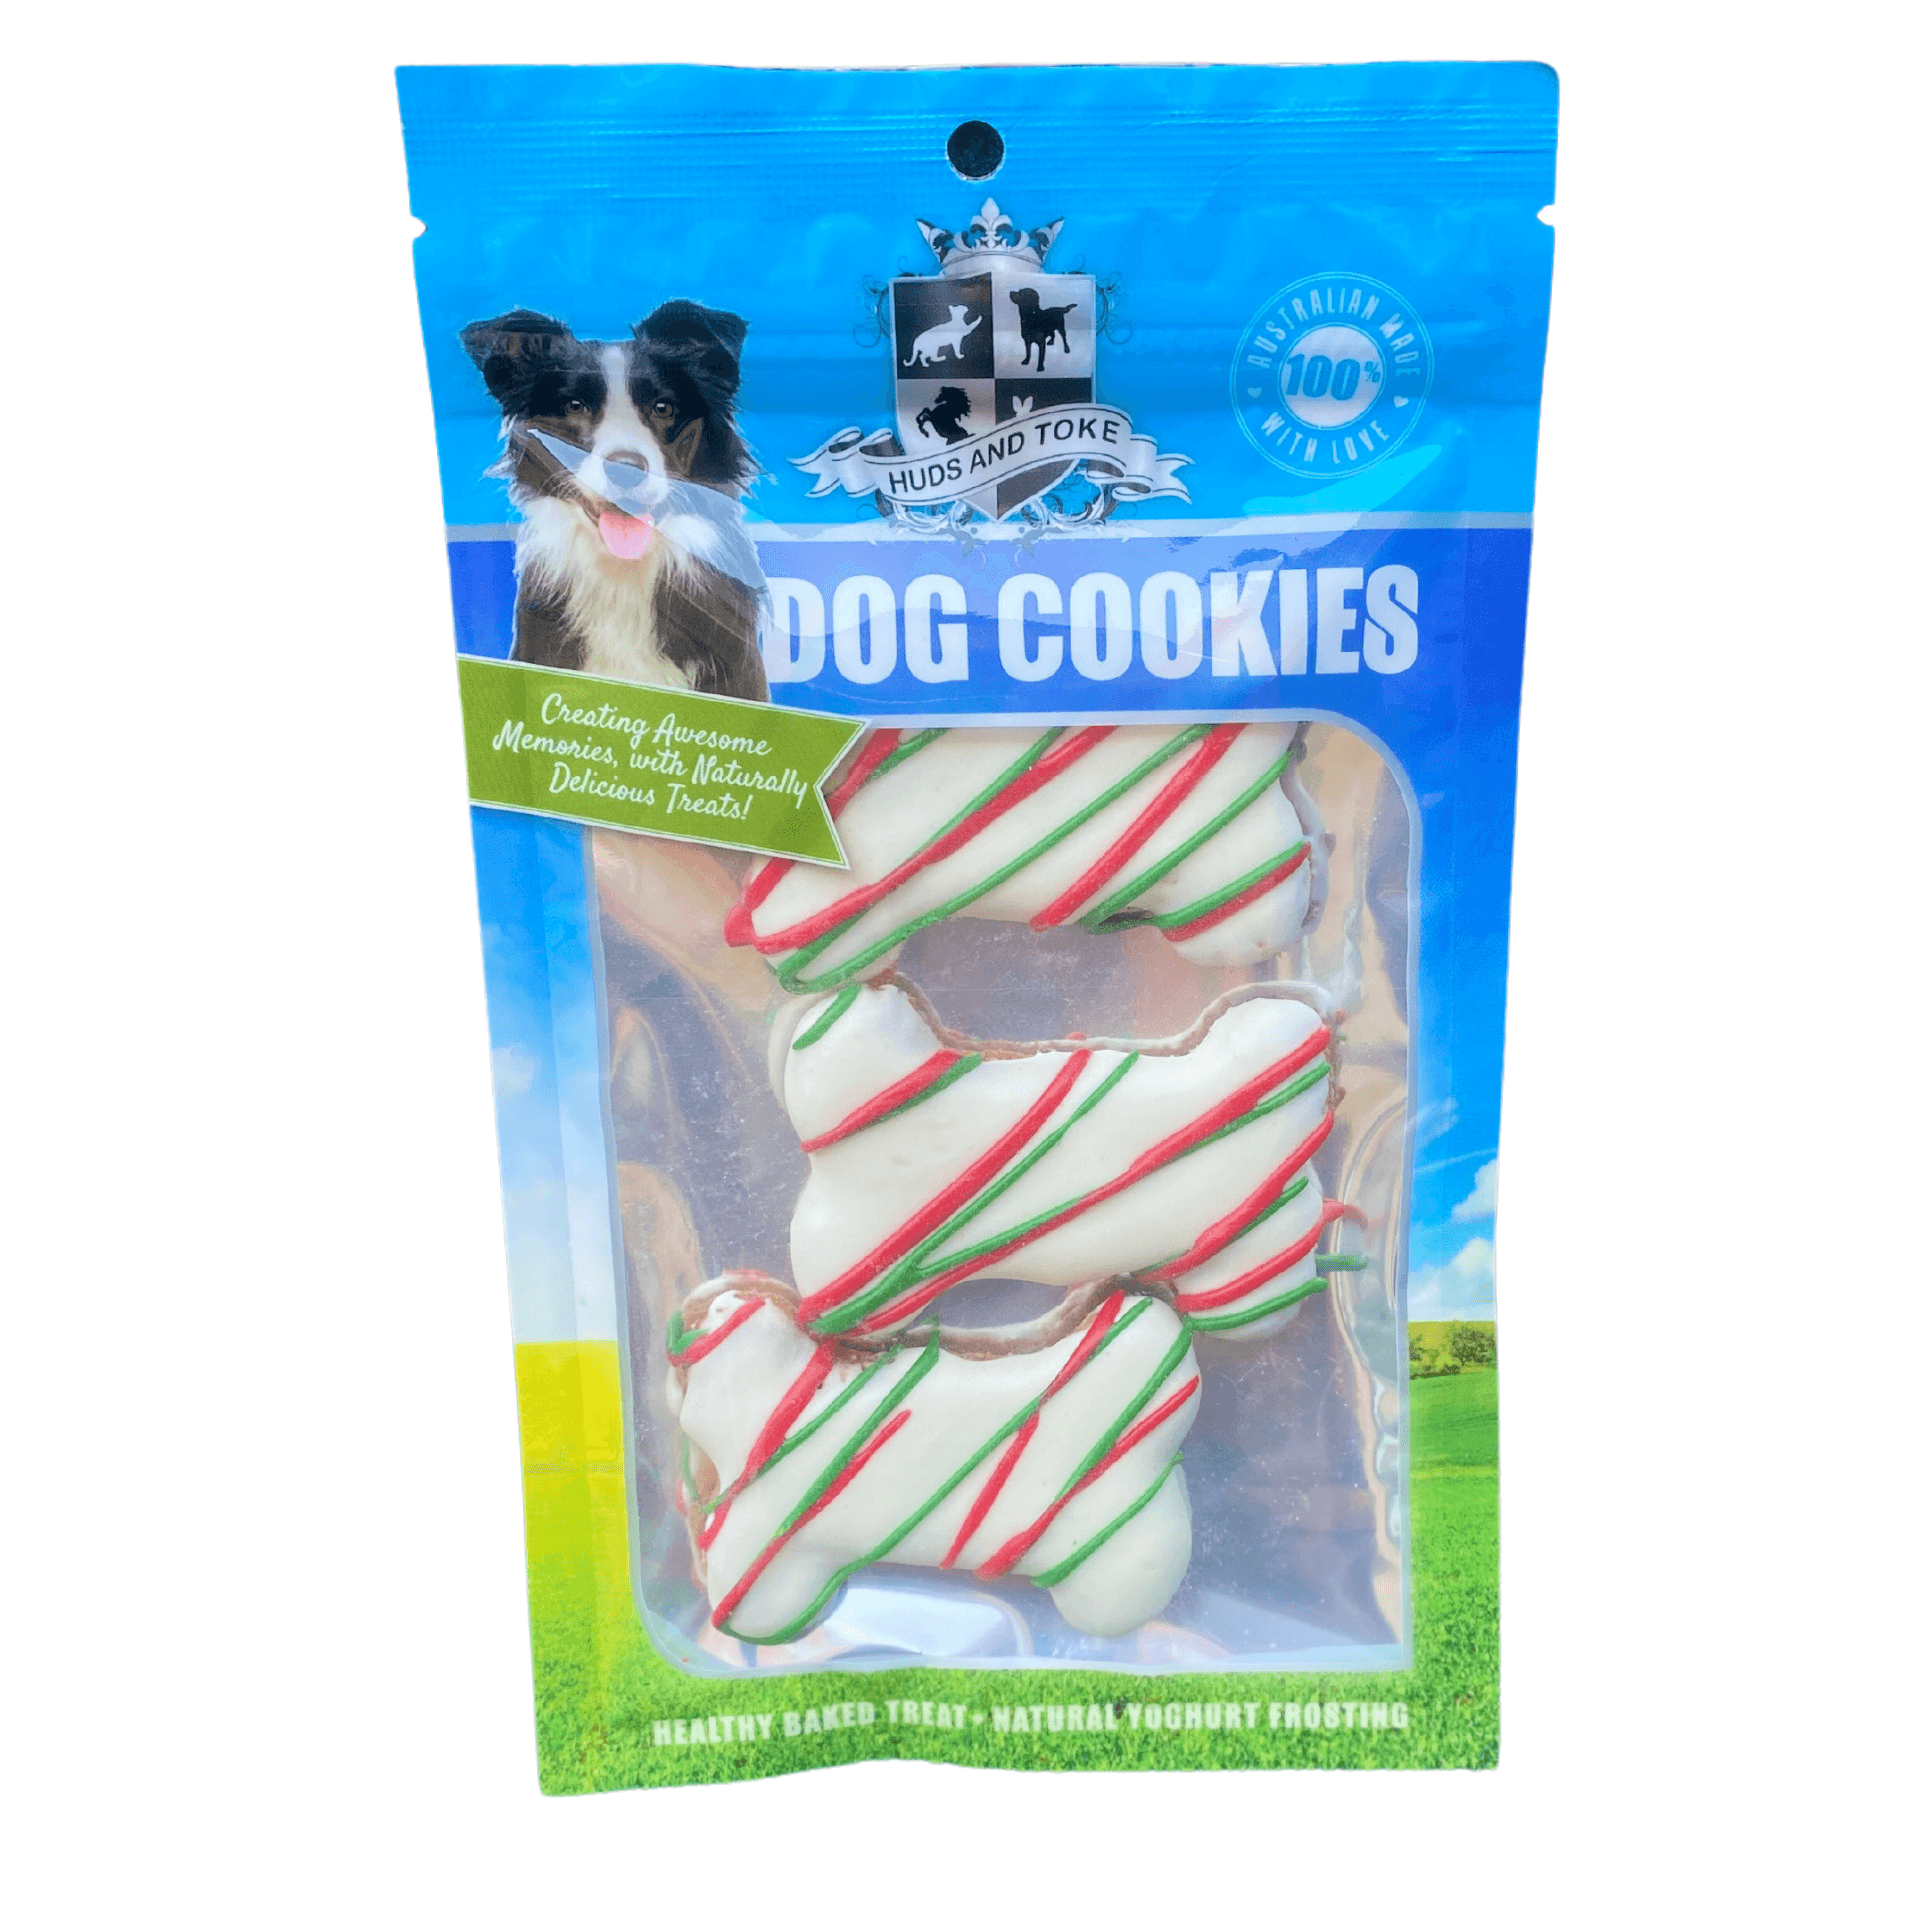 Edible dog treat for Christmas Let's Pawty Sydney